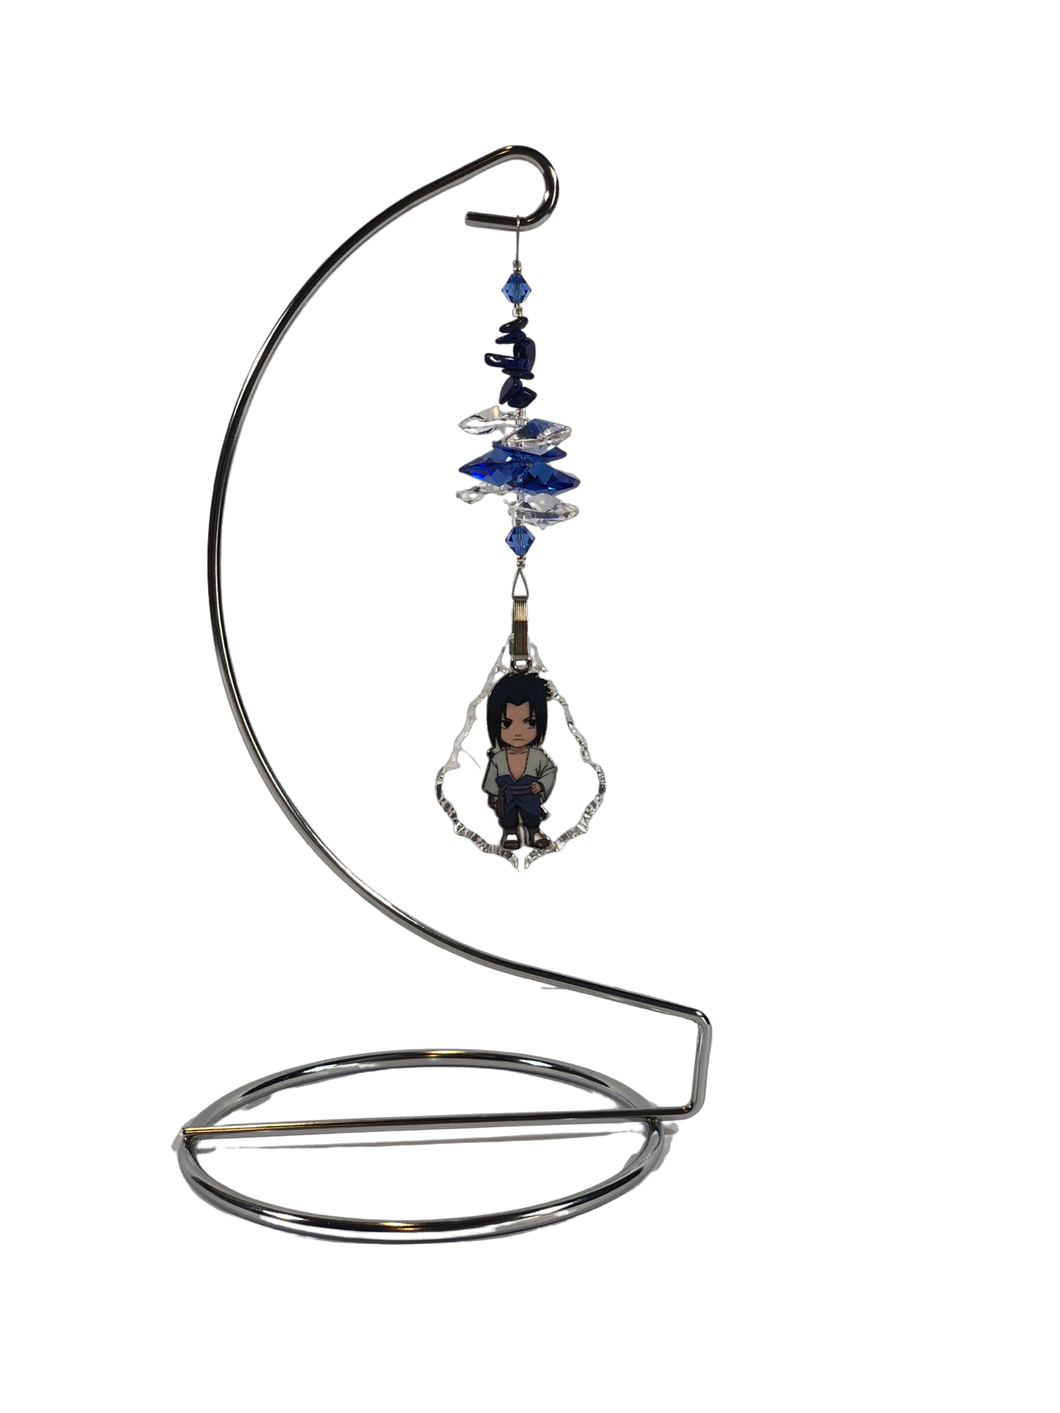 Naruto Emo - crystal suncatcher is decorated with lapis lazuli gemstones and come on this amazing stand.